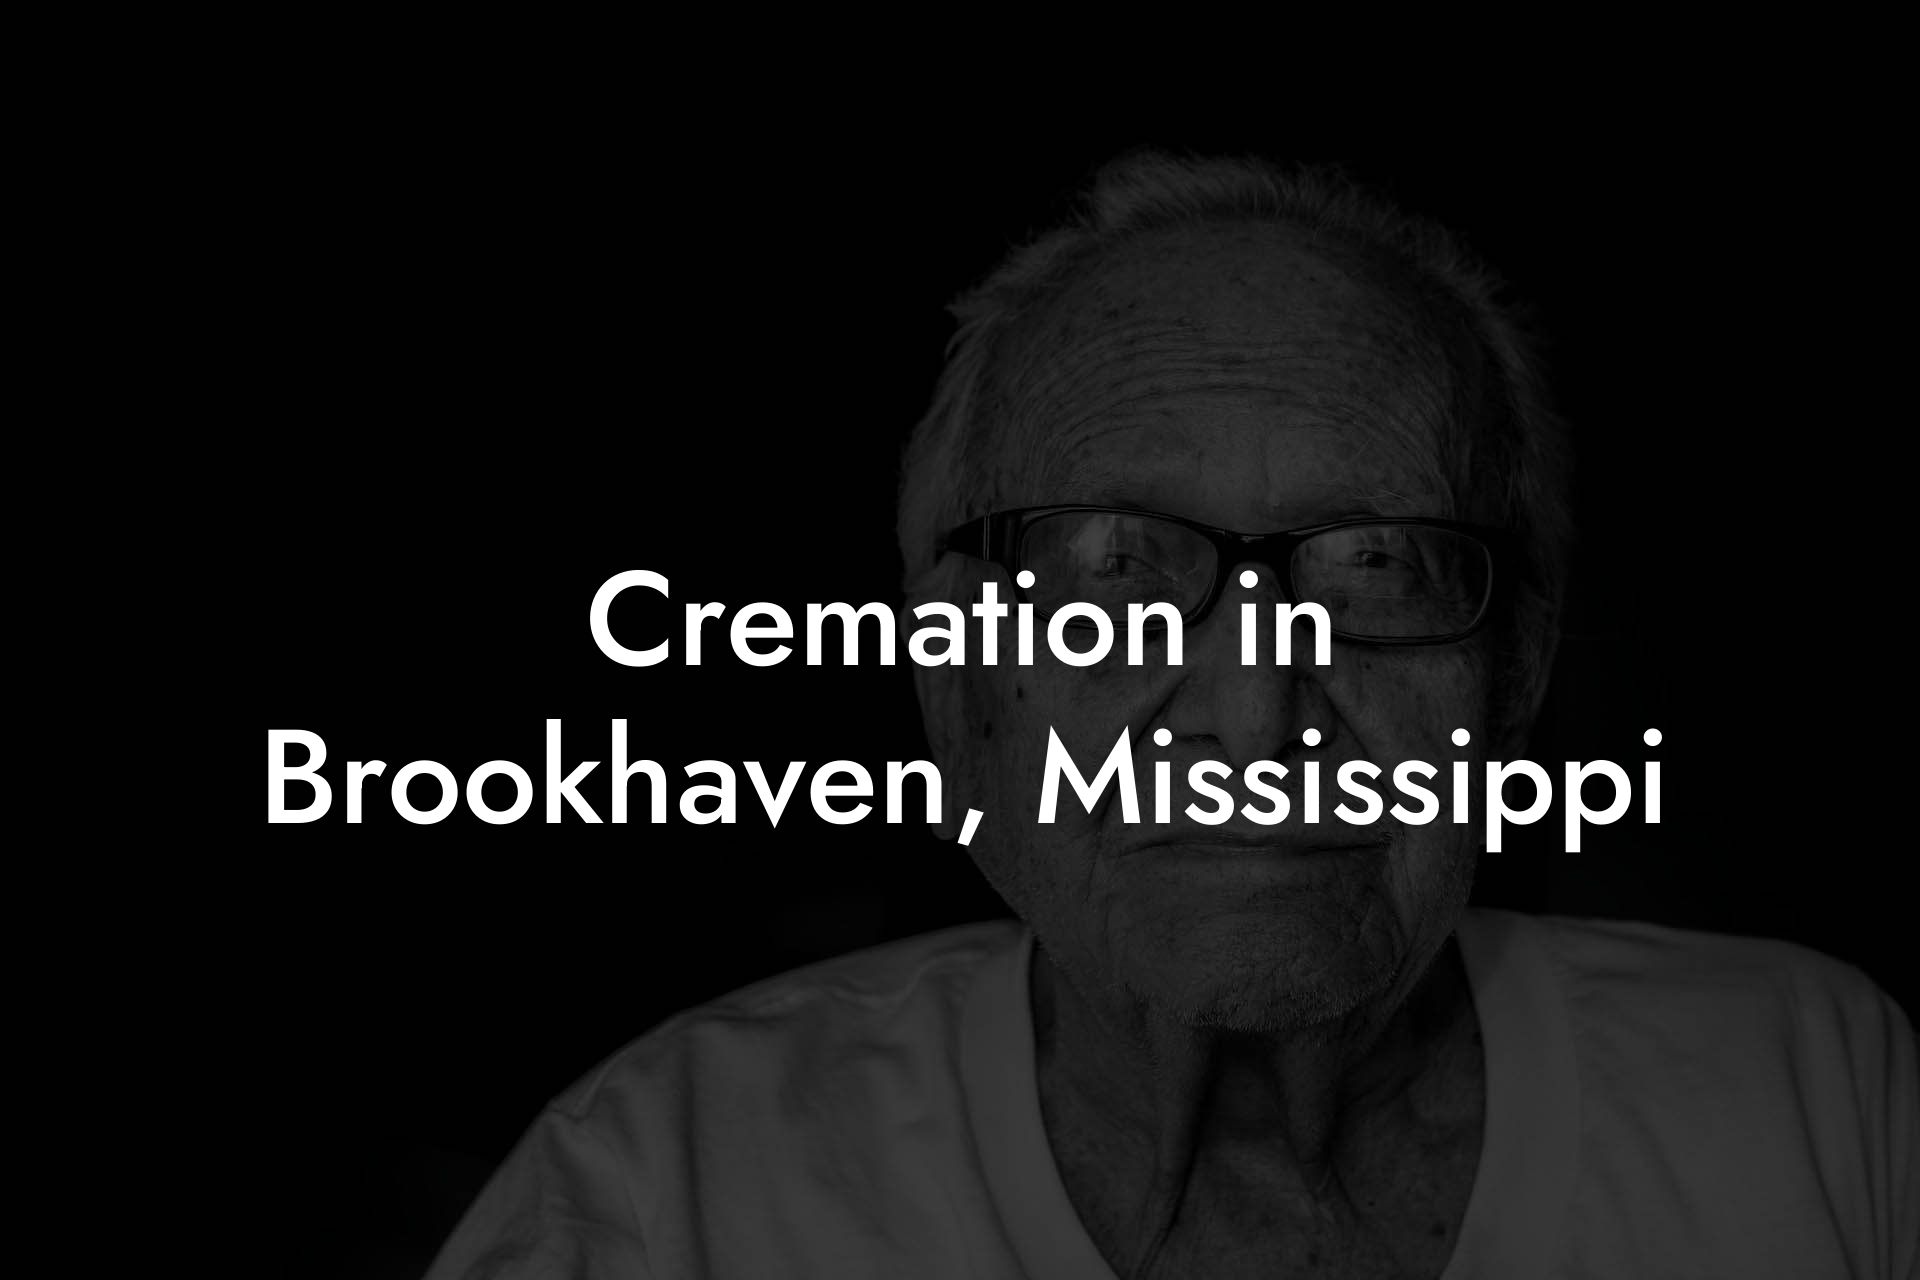 Cremation in Brookhaven, Mississippi